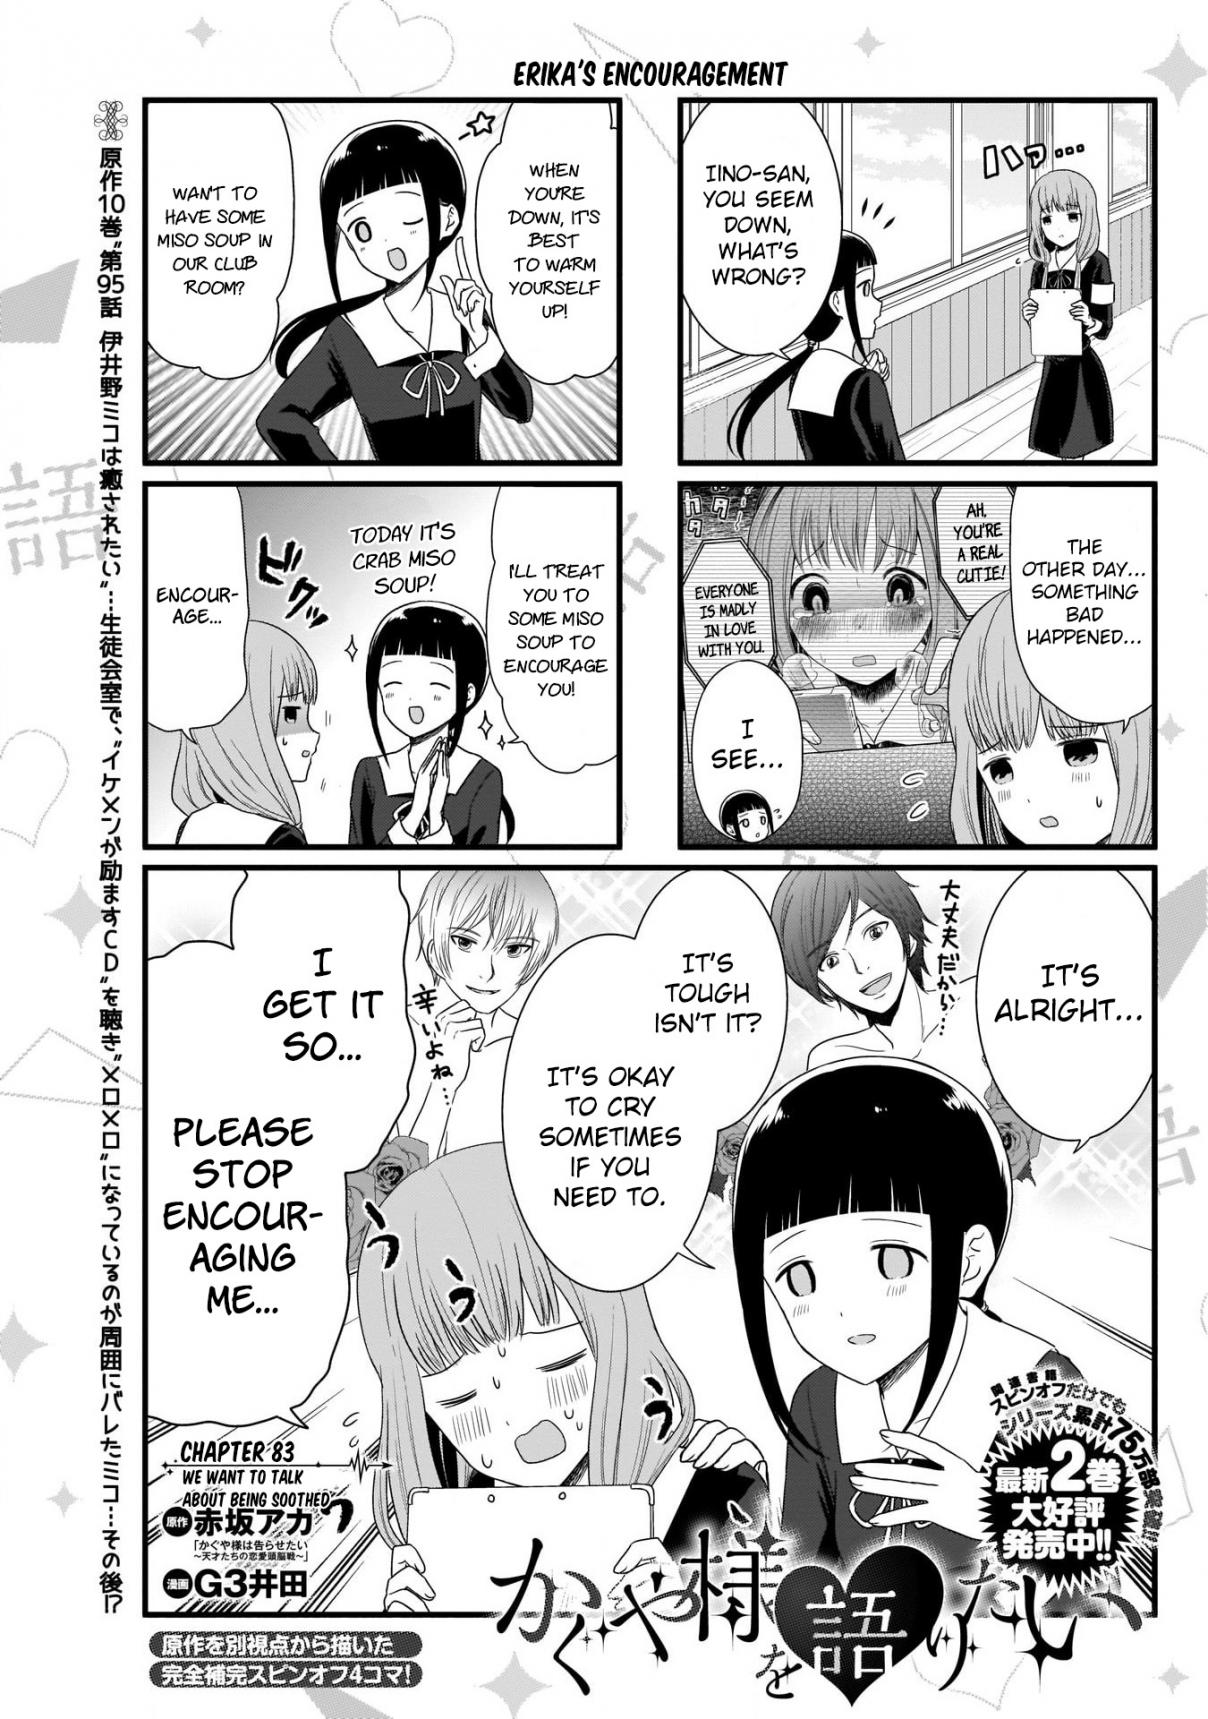 We Want To Talk About Kaguya Ch. 83 We Want to Talk About Being Soothed